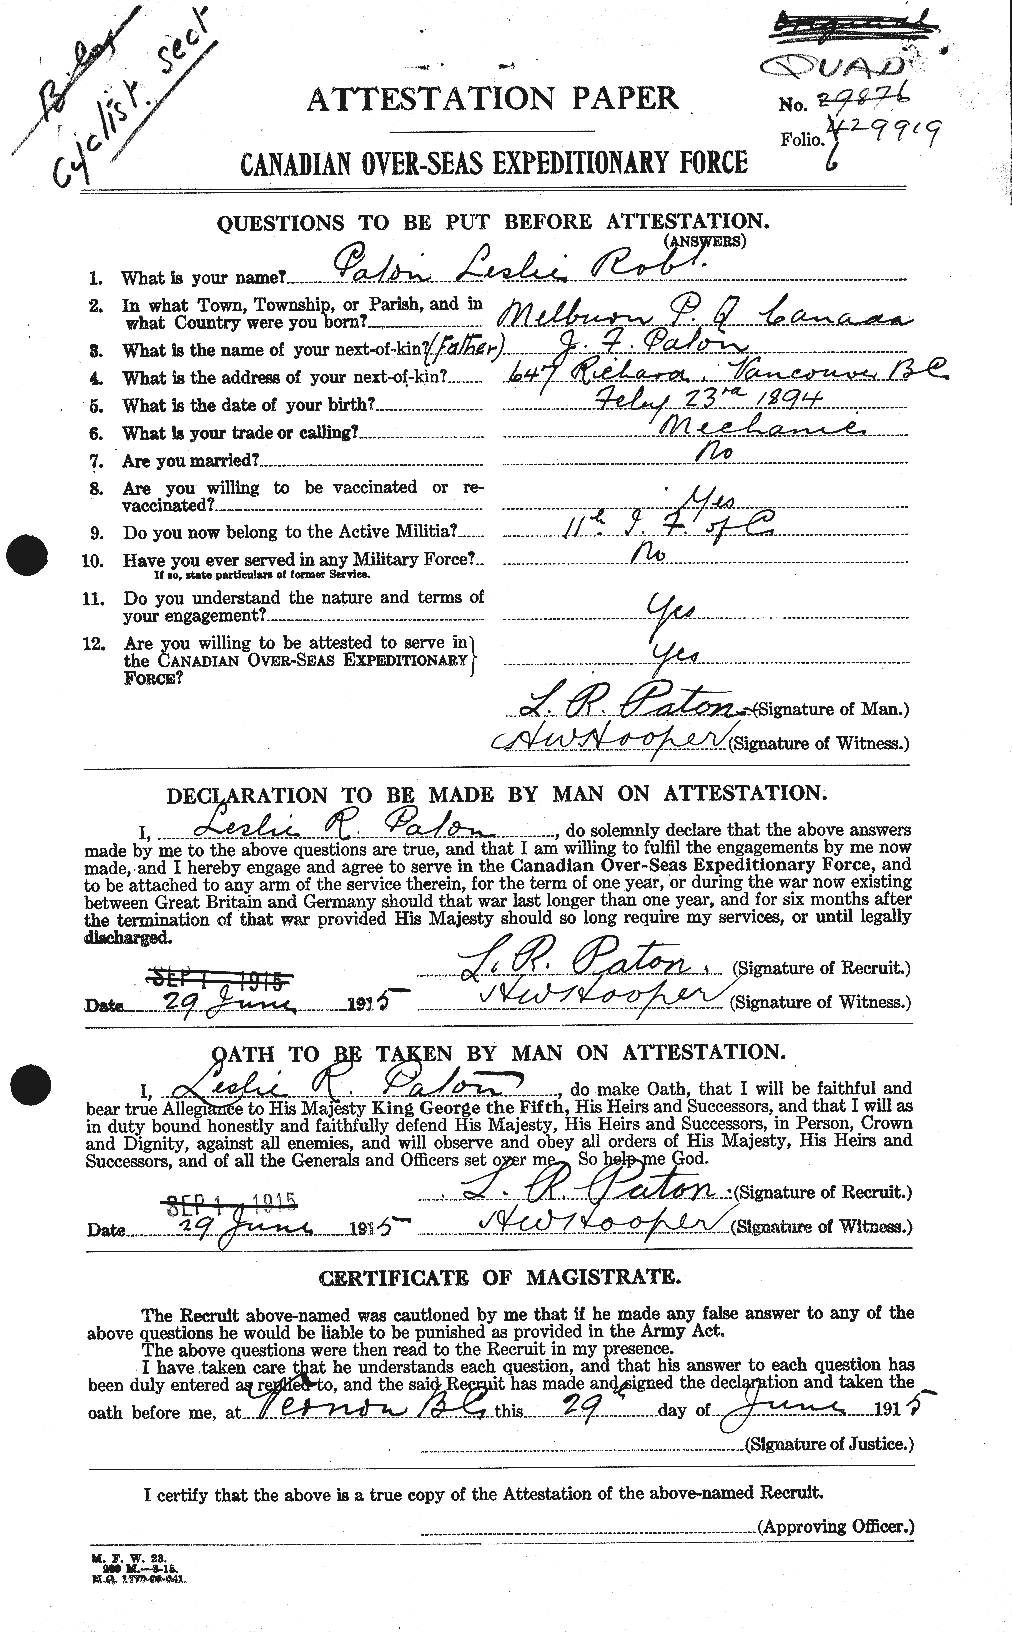 Personnel Records of the First World War - CEF 567940a